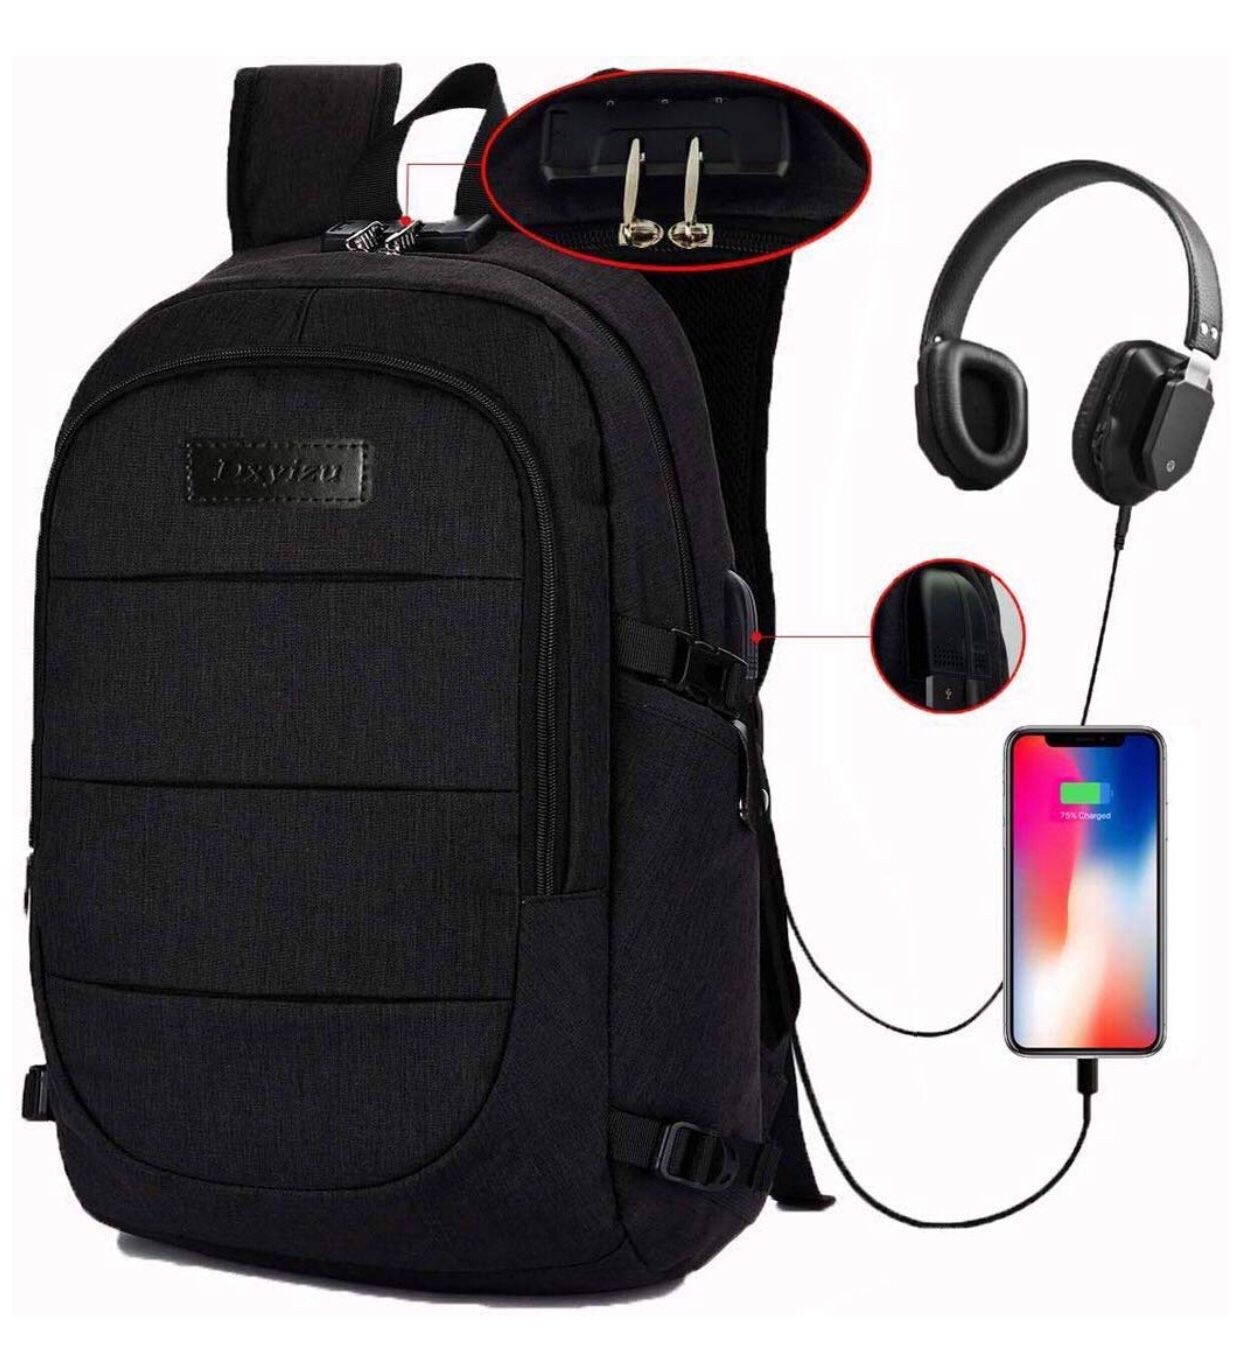 Laptop Backpack, Business Anti Theft Waterproof Travel Backpack with USB Charging Port & Headphone Interface for College Student for Women Men,Fits U